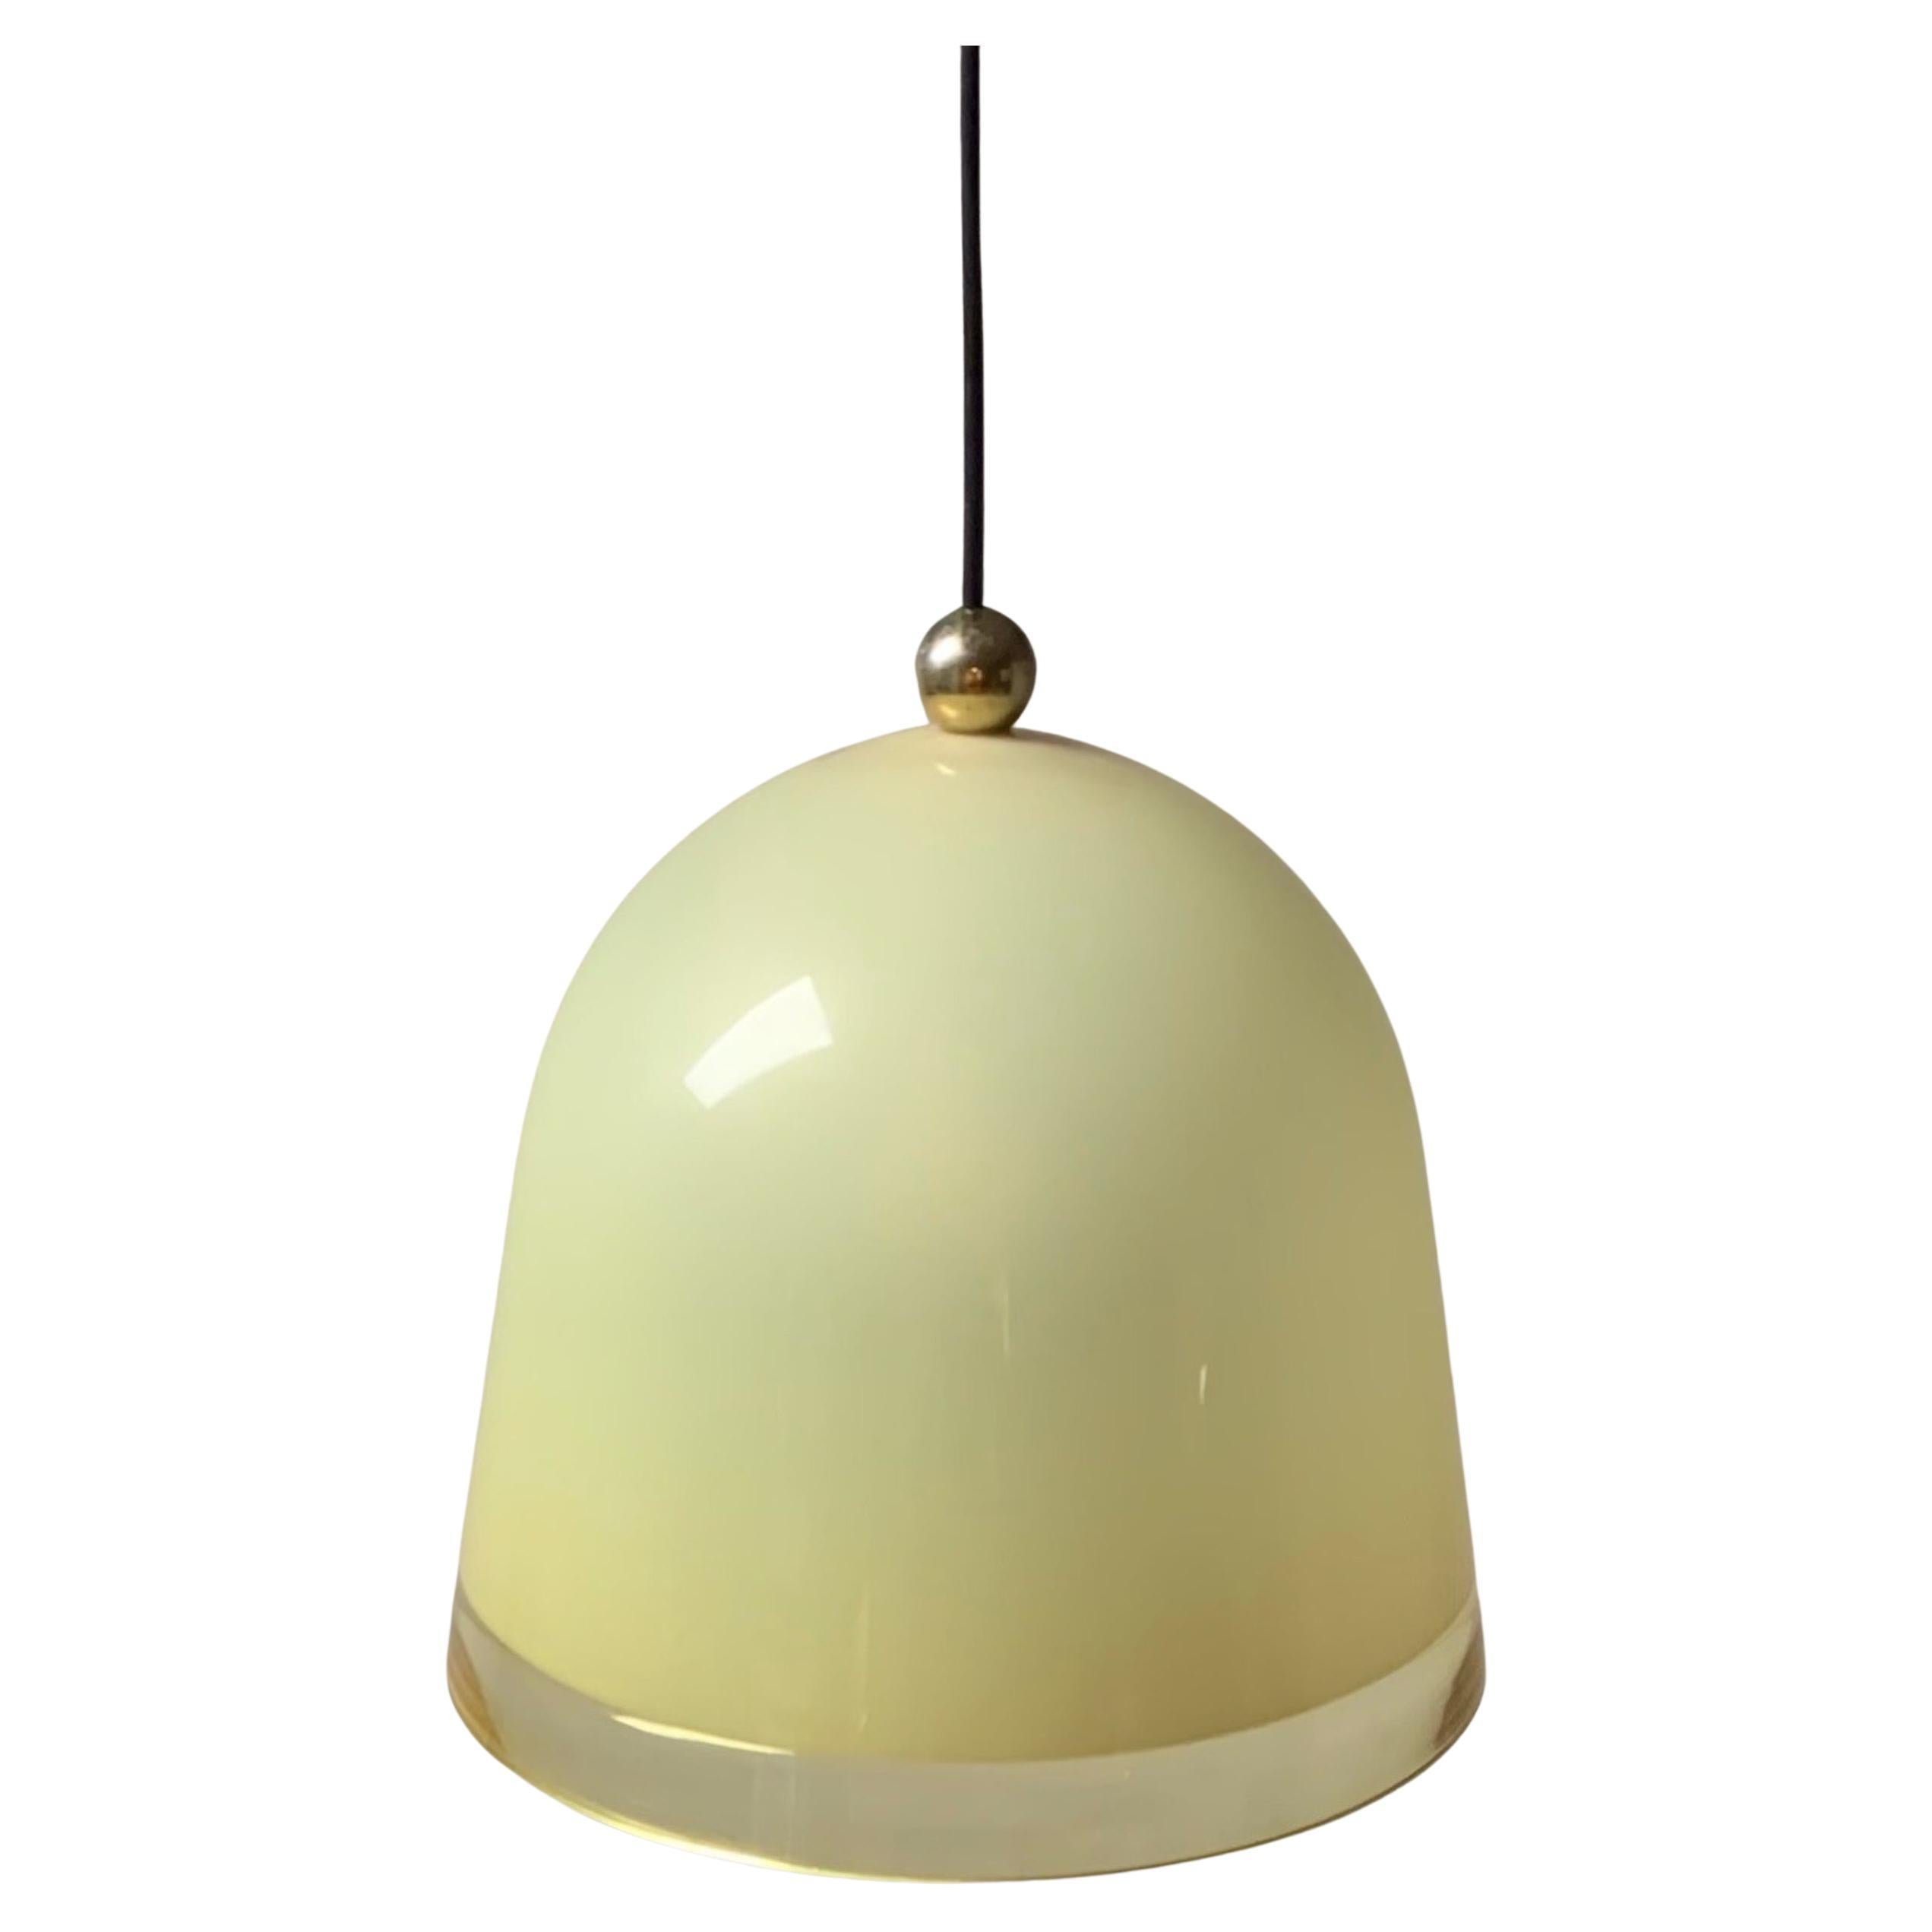 Guzzini Kuala Pendant Lamp was designed by Franco Bresciani in 1975 and produced by iGuzzini from the late 70s until mid 80s. This bell shaped conical lampshade is manufactured with ochre translucent acrylic. It has a chromed metal gold ball on top